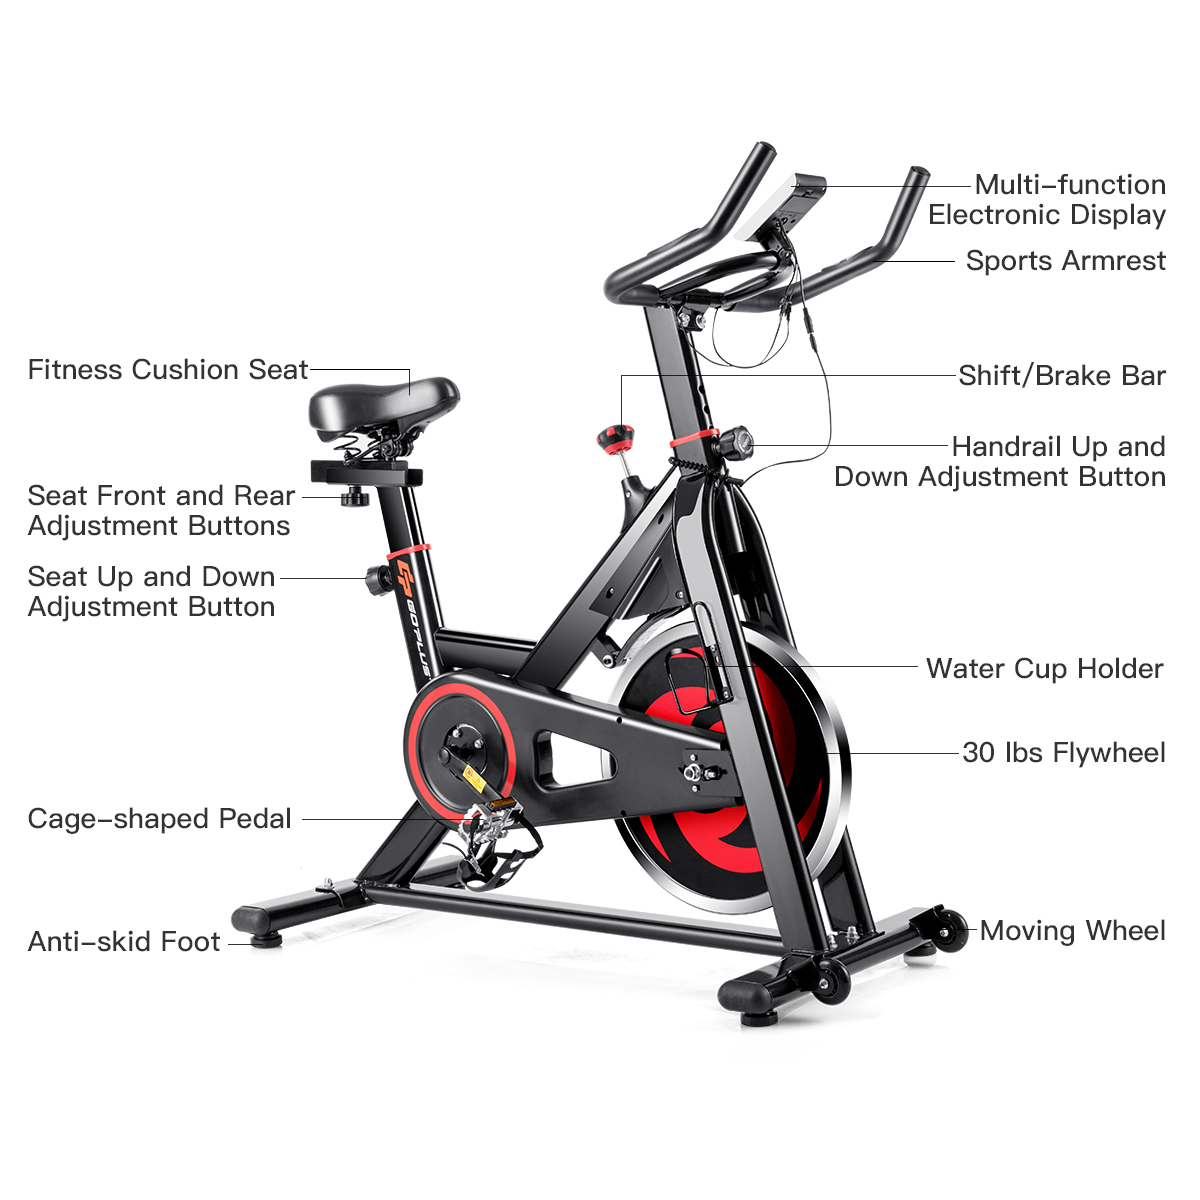 Stationary Exercise Magnetic Cycling Bike 30Lbs Flywheel Home Gym Cardio Workout - image 5 of 10